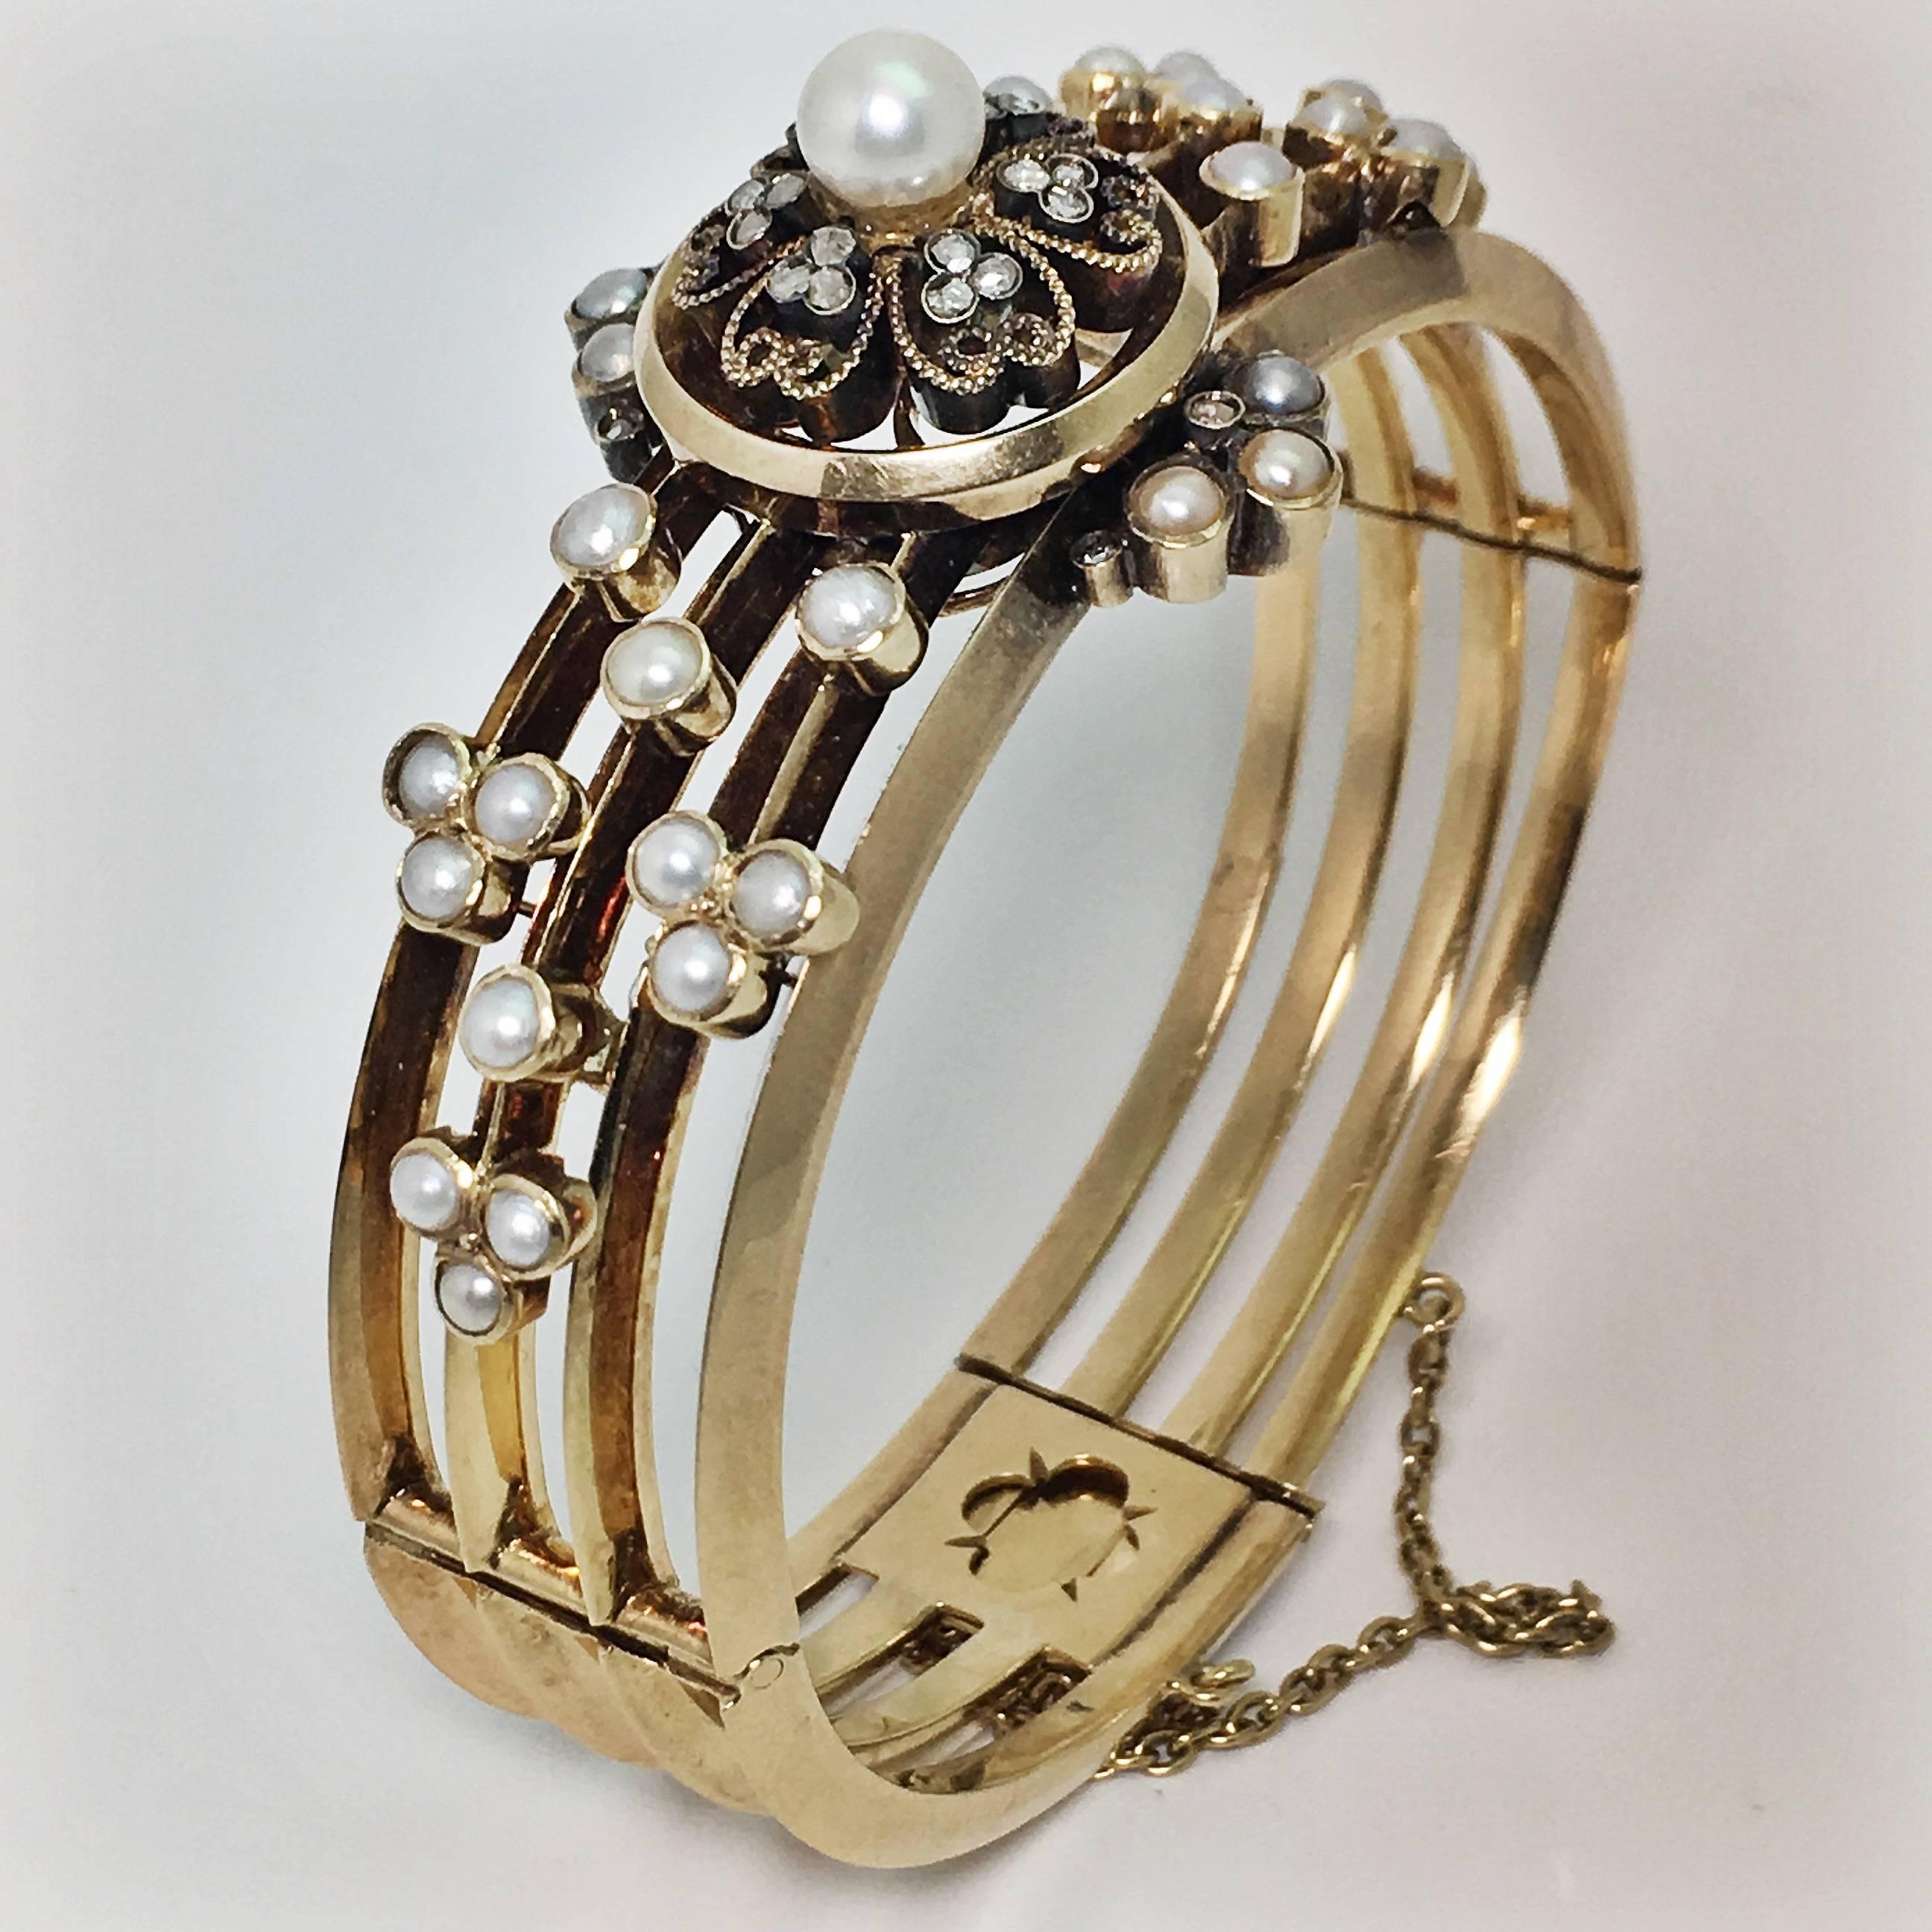 A french antique pearl and diamond yellow gold hinged bangle. This bangle would have been made in the late 19th century.The structure of the bangle consists for bands of hollow yellow gold crafted beautifully into shape with a secure clasp and